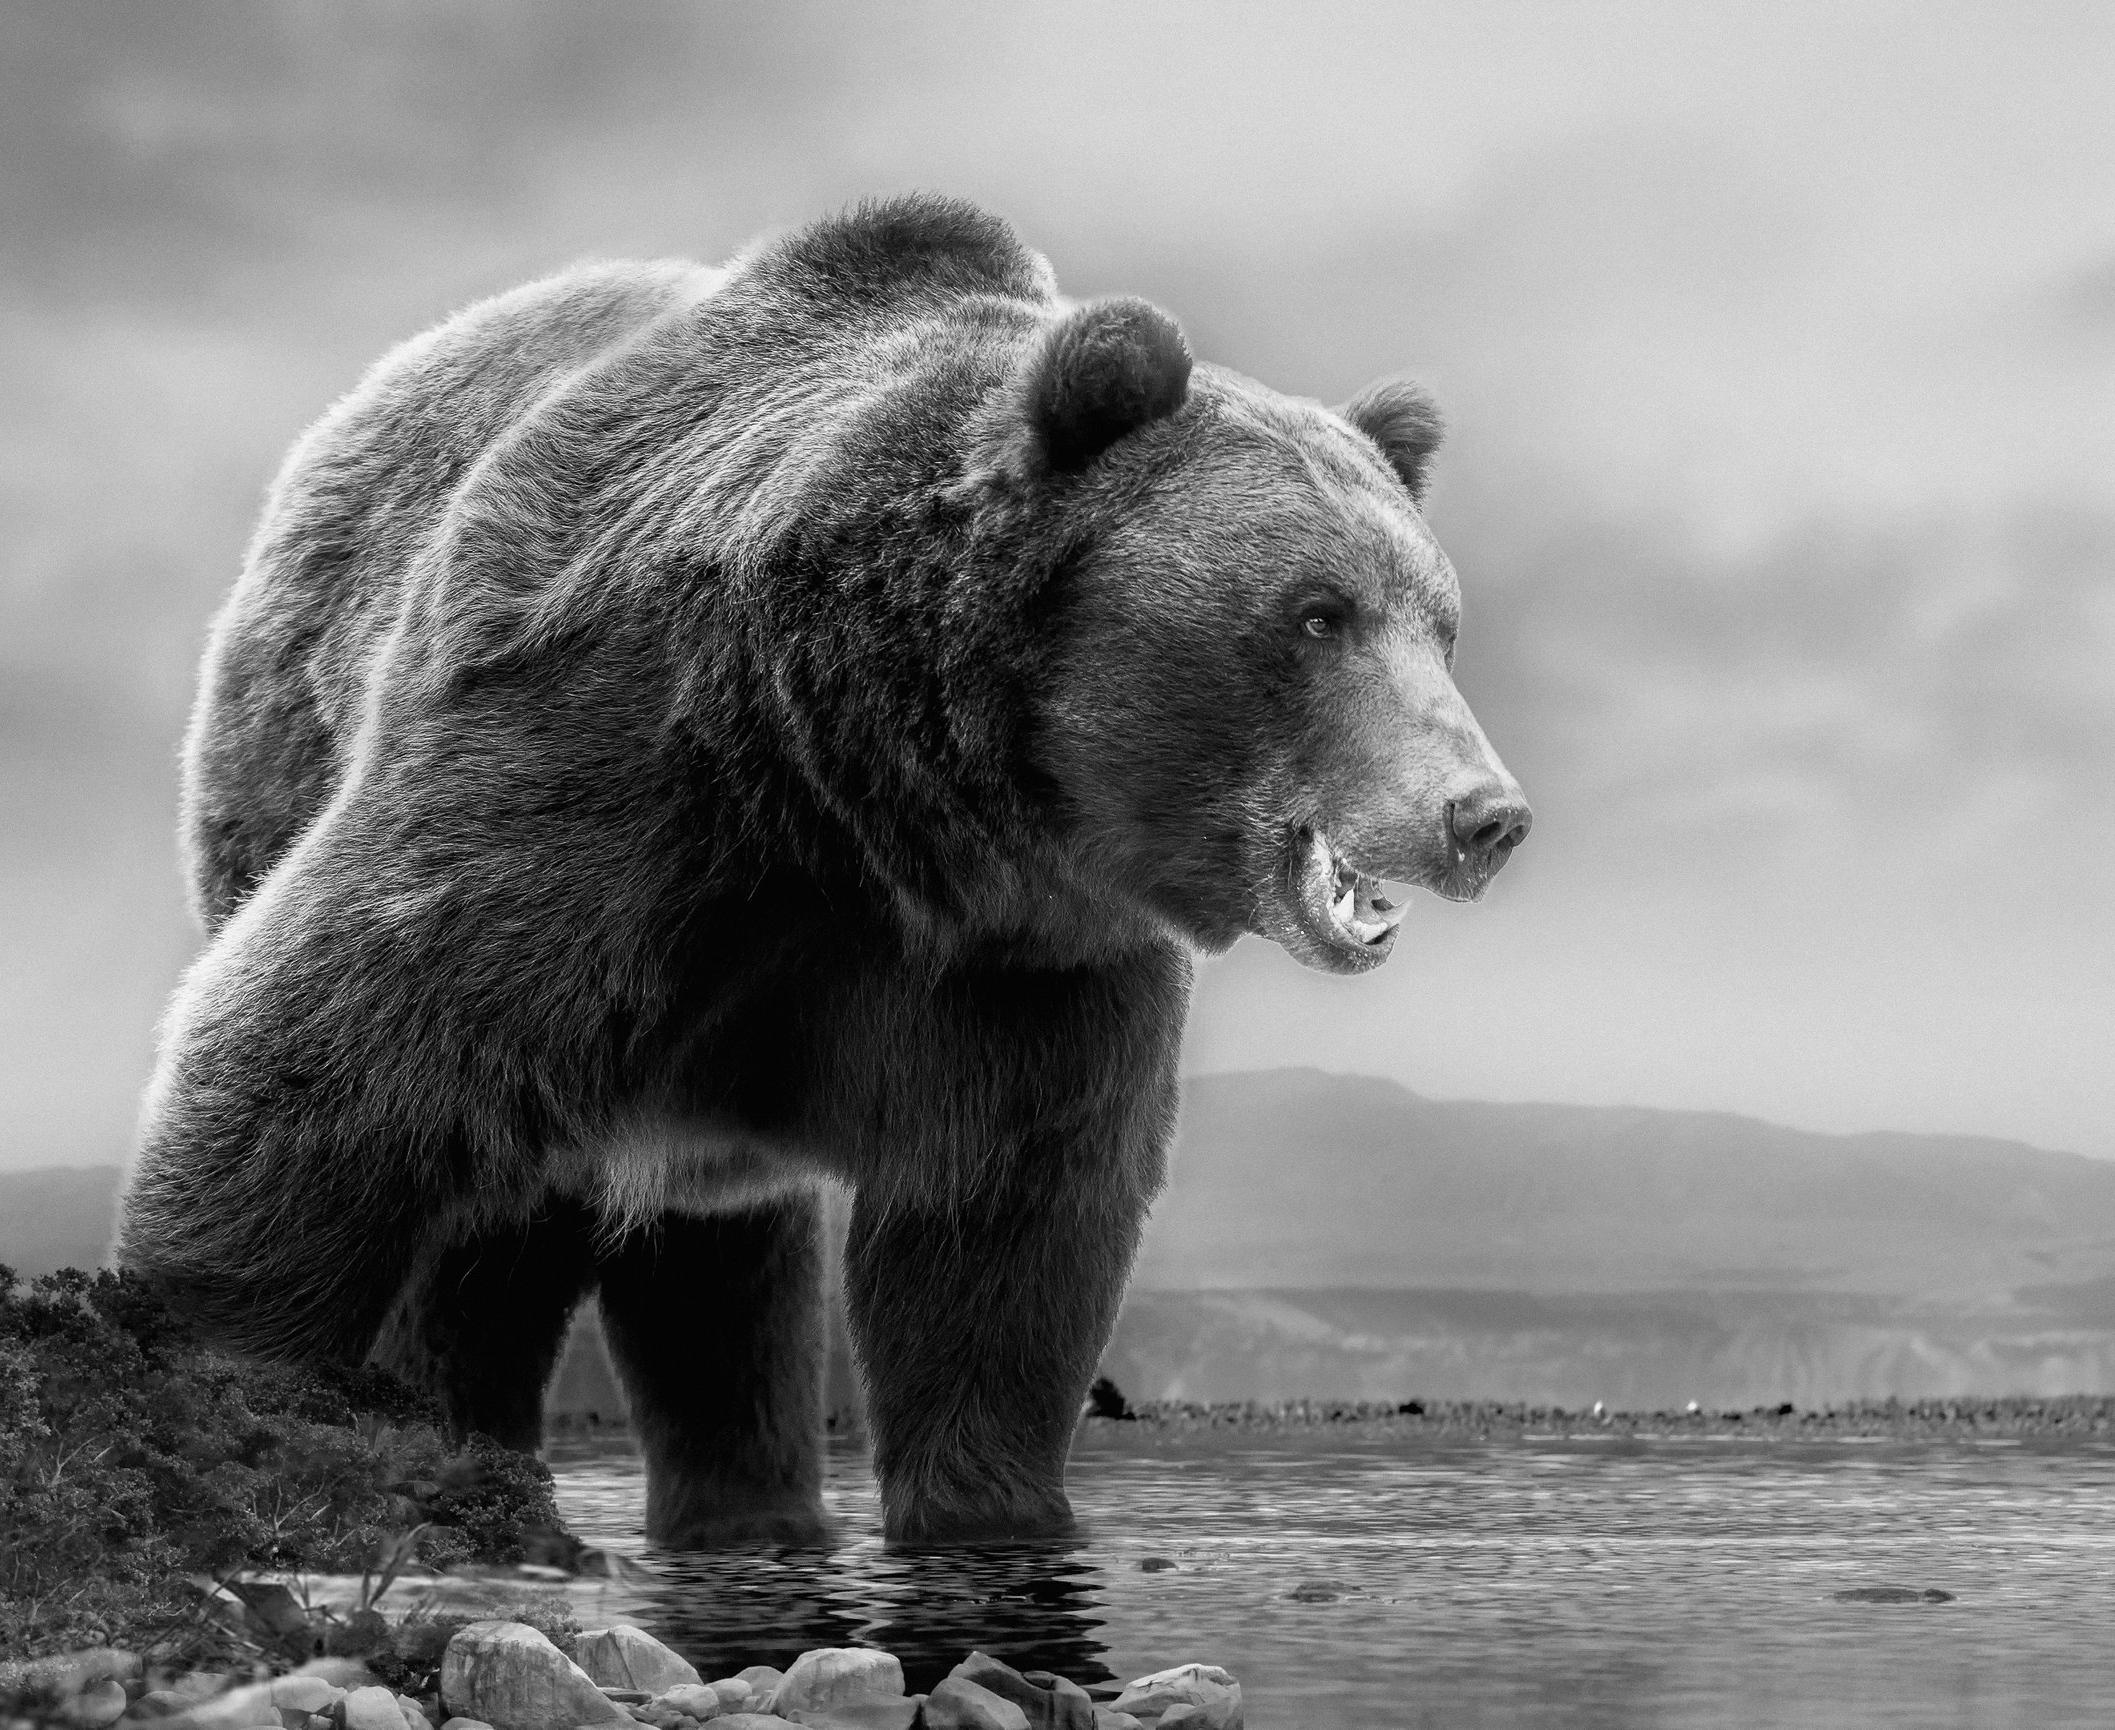 Shane Russeck Black and White Photograph - "On The Waterfront"  50x60  Black & White Photography, Kodiak Bear Grizzly Bear